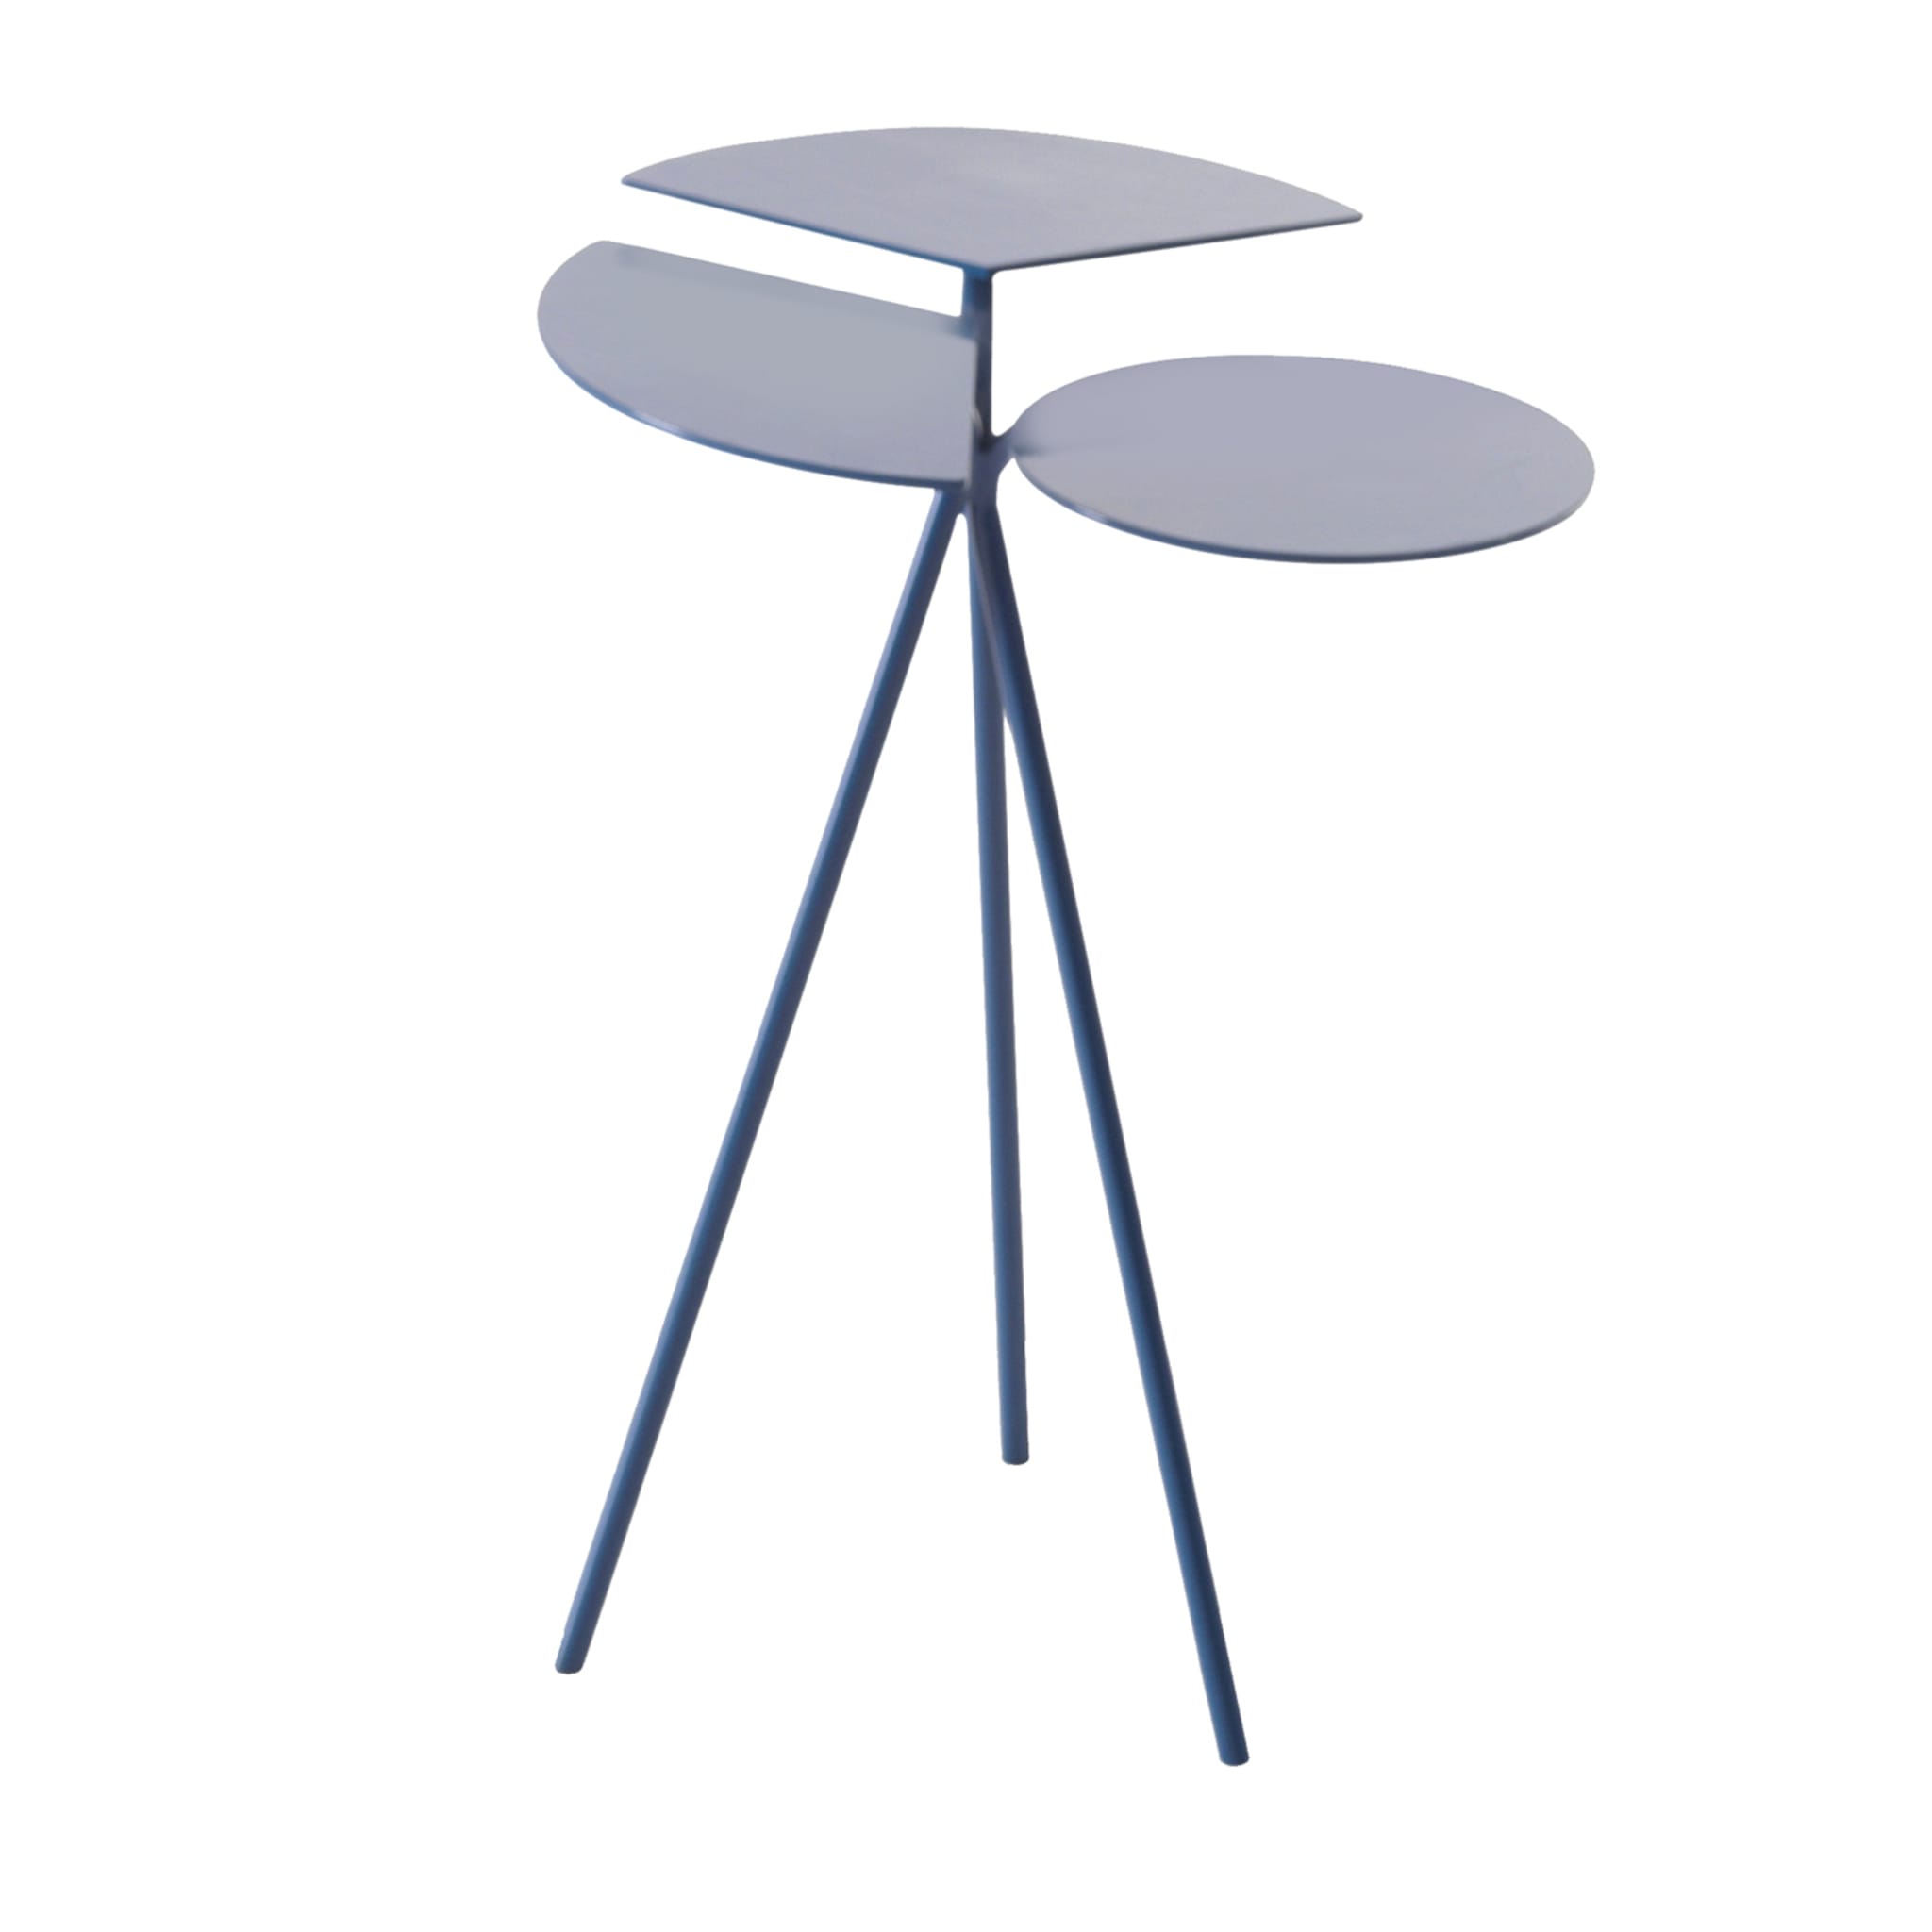 Lady Bug Blue Side Table by Angeletti Ruzza - Main view